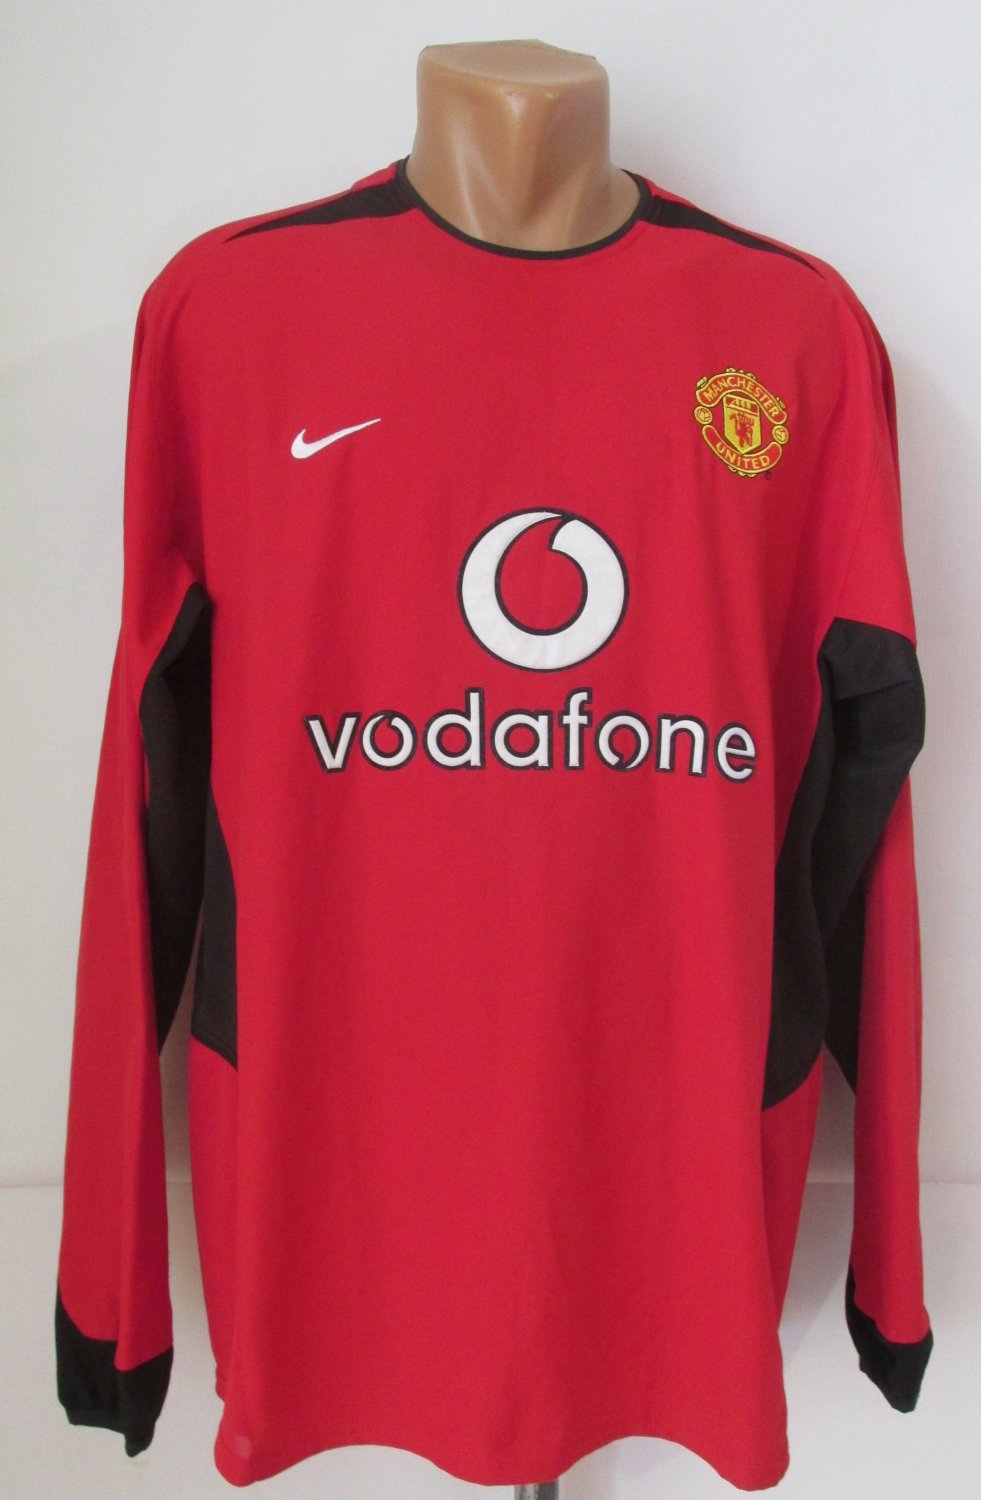 Manchester United Home football shirt 2002 - 2004. Sponsored by Vodafone